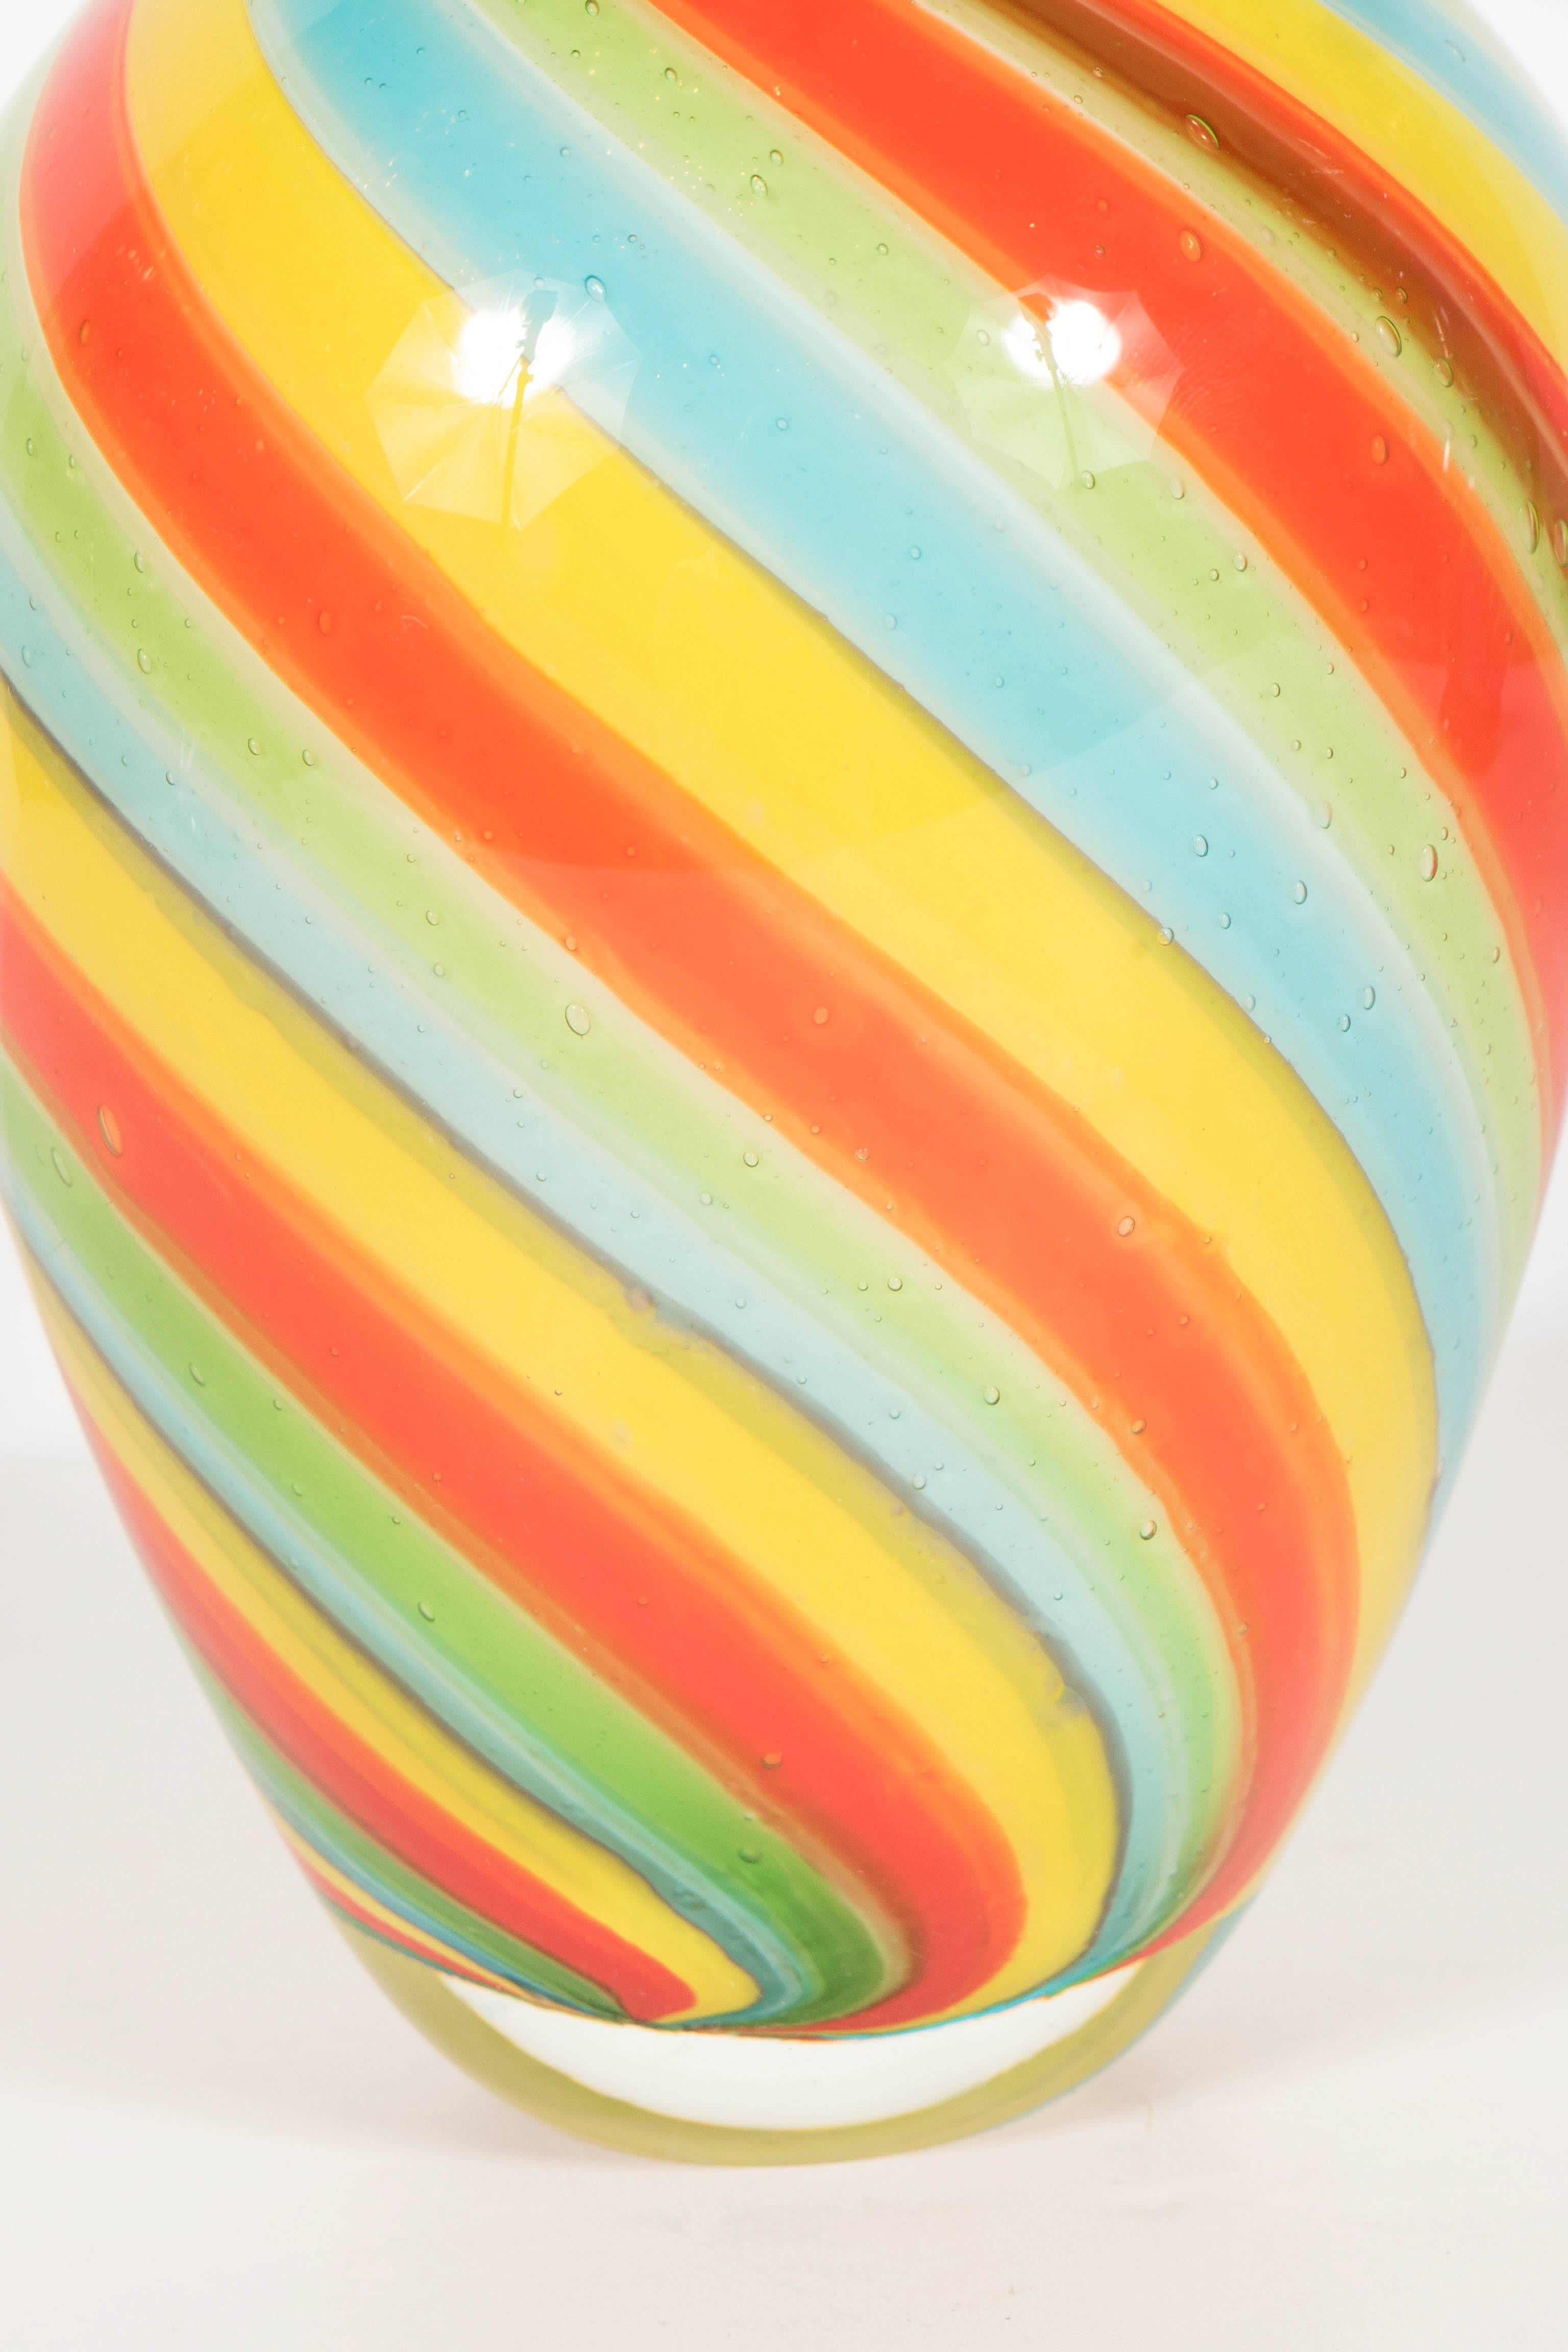 A radiant Murano vase with hand blown and multi-colored candy striped glass.  Campari orange, Chartreuse green, sky blue and yellow candy stripes form a swirling pattern along the piece. This would make a colorful and dynamic addition to any room,